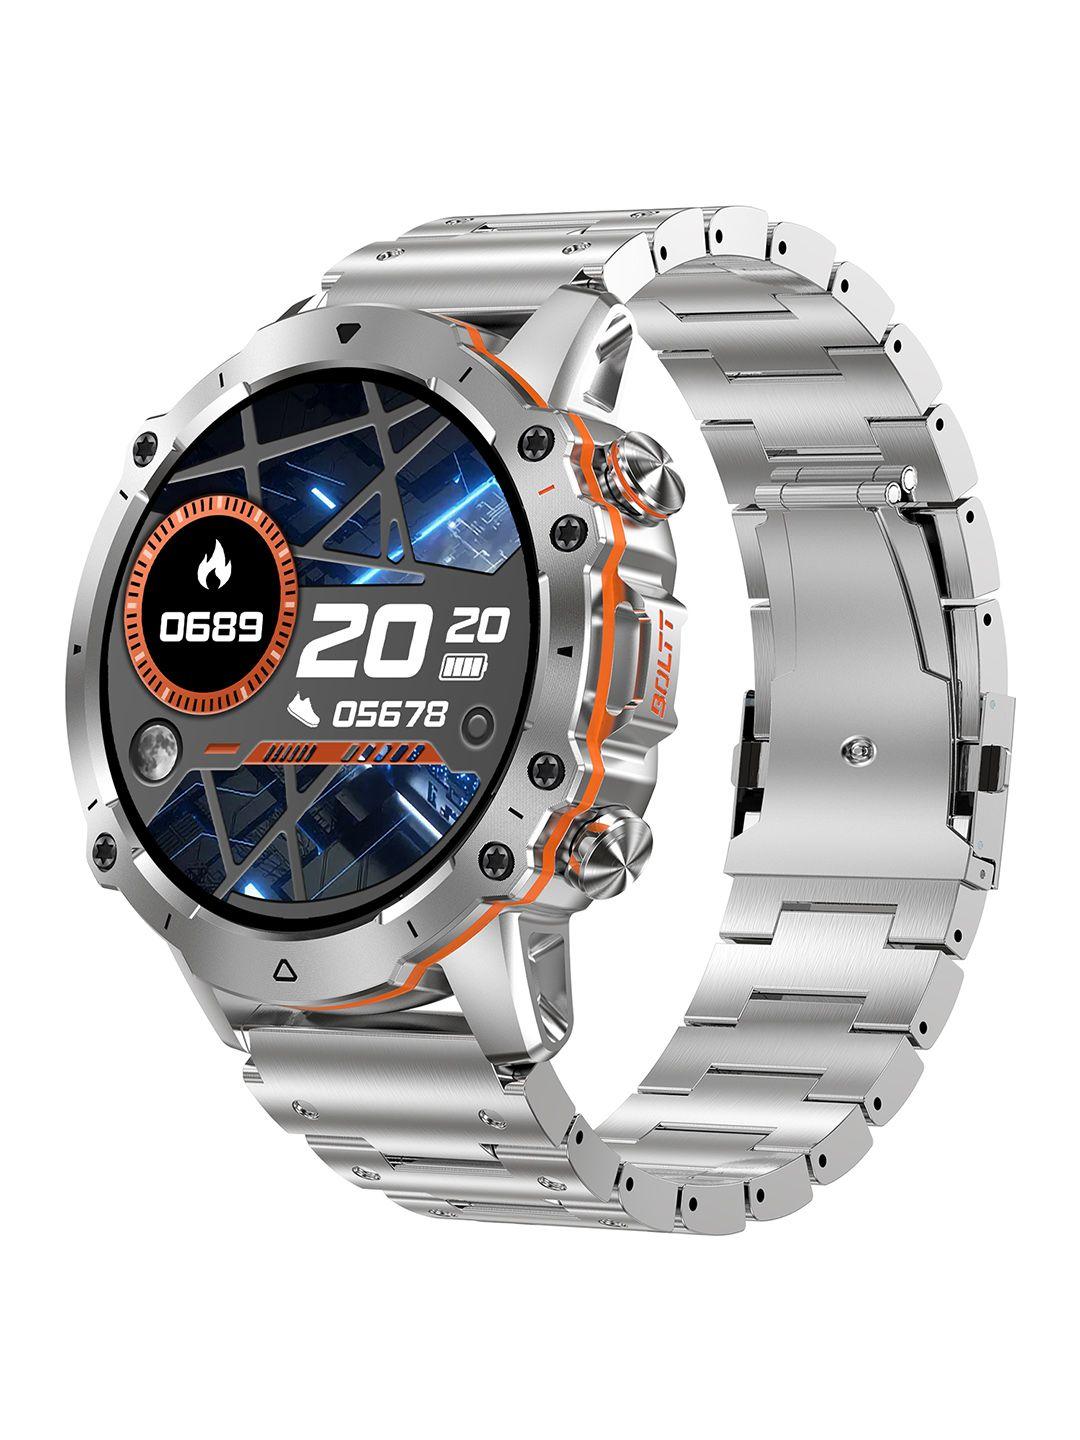 fire-boltt marshal 1.43 hd display rugged smartwatch with military grade quality